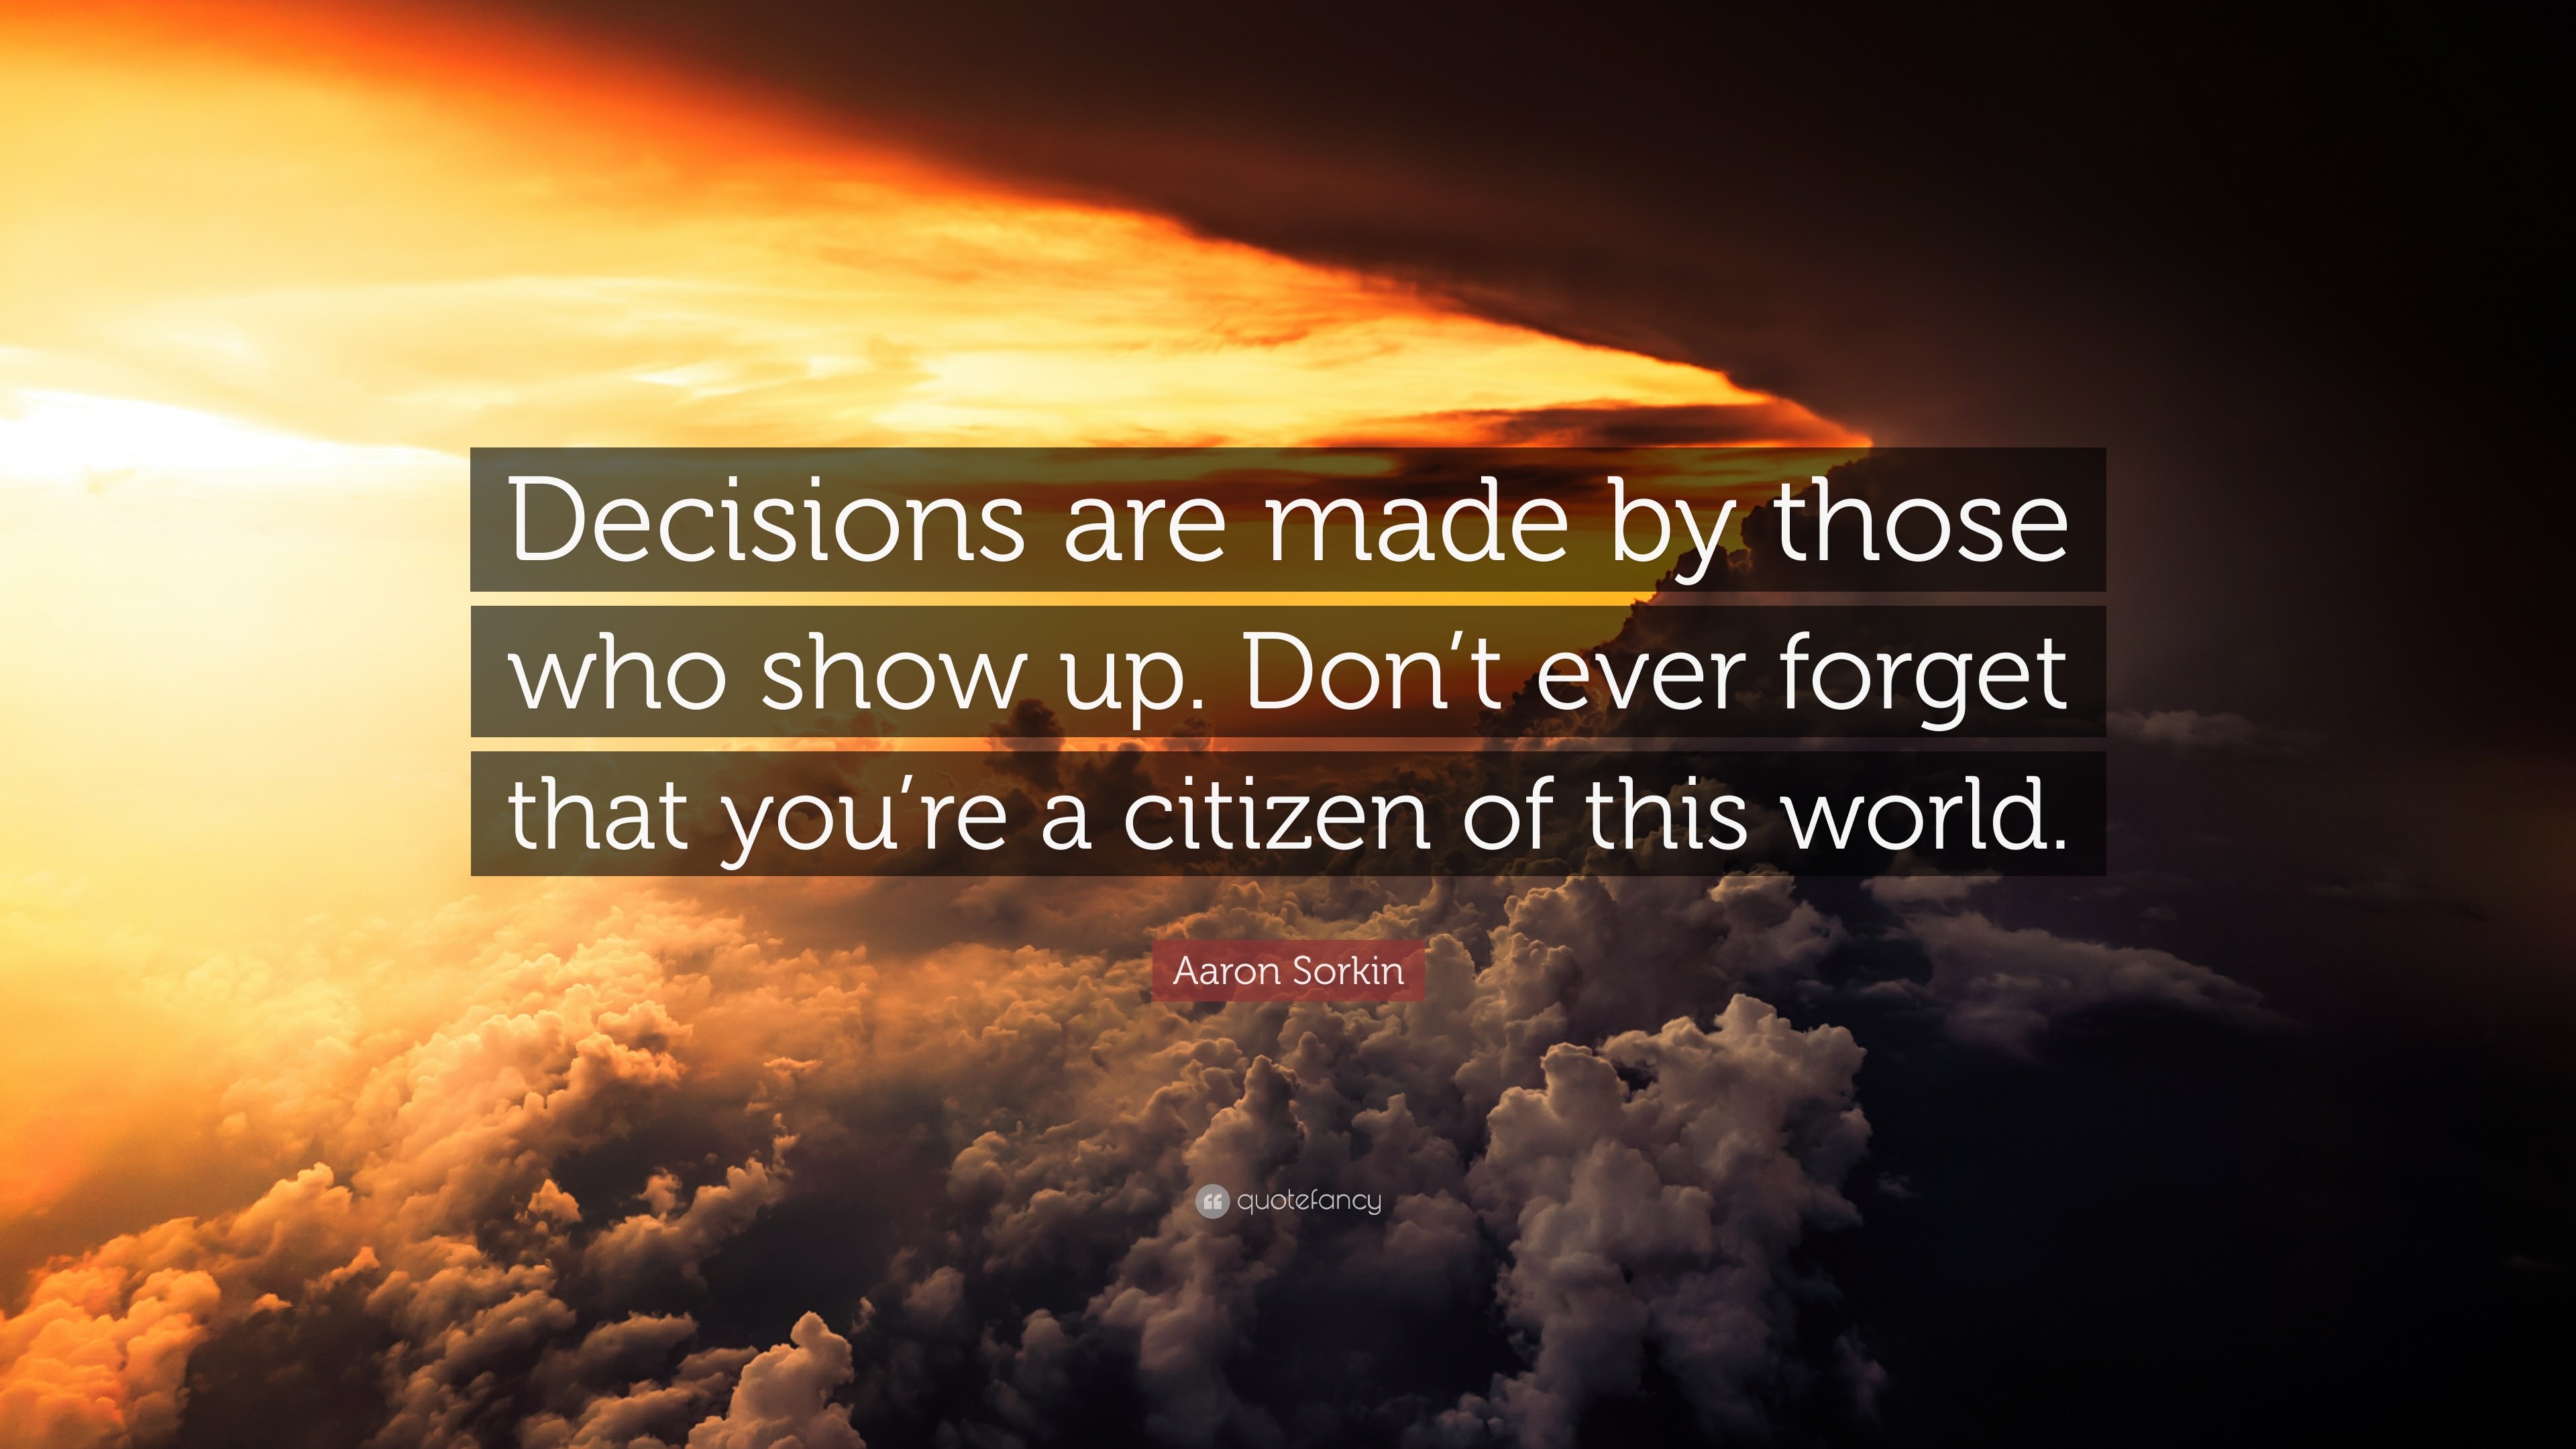 Aaron Sorkin Quote “decisions Are Made By Those Who Show Up Dont Ever Forget That Youre A 